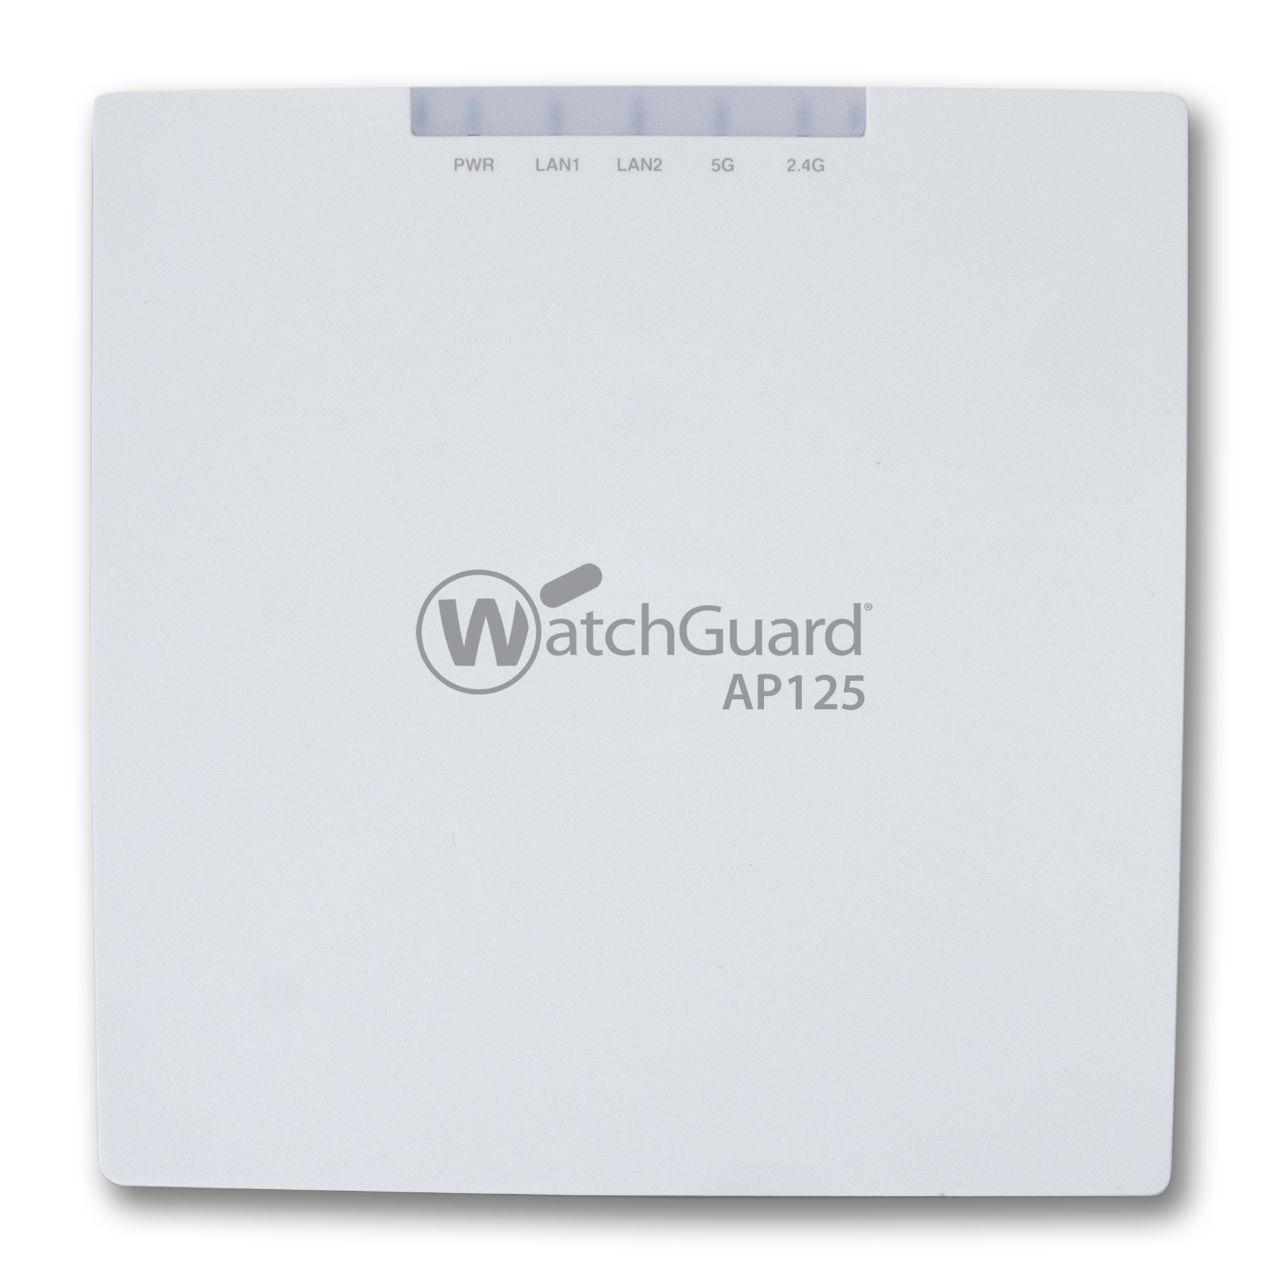 WatchGuard AP125, Competitive Trade In to WatchGuard AP125 and 3-yr Total Wi-Fi,